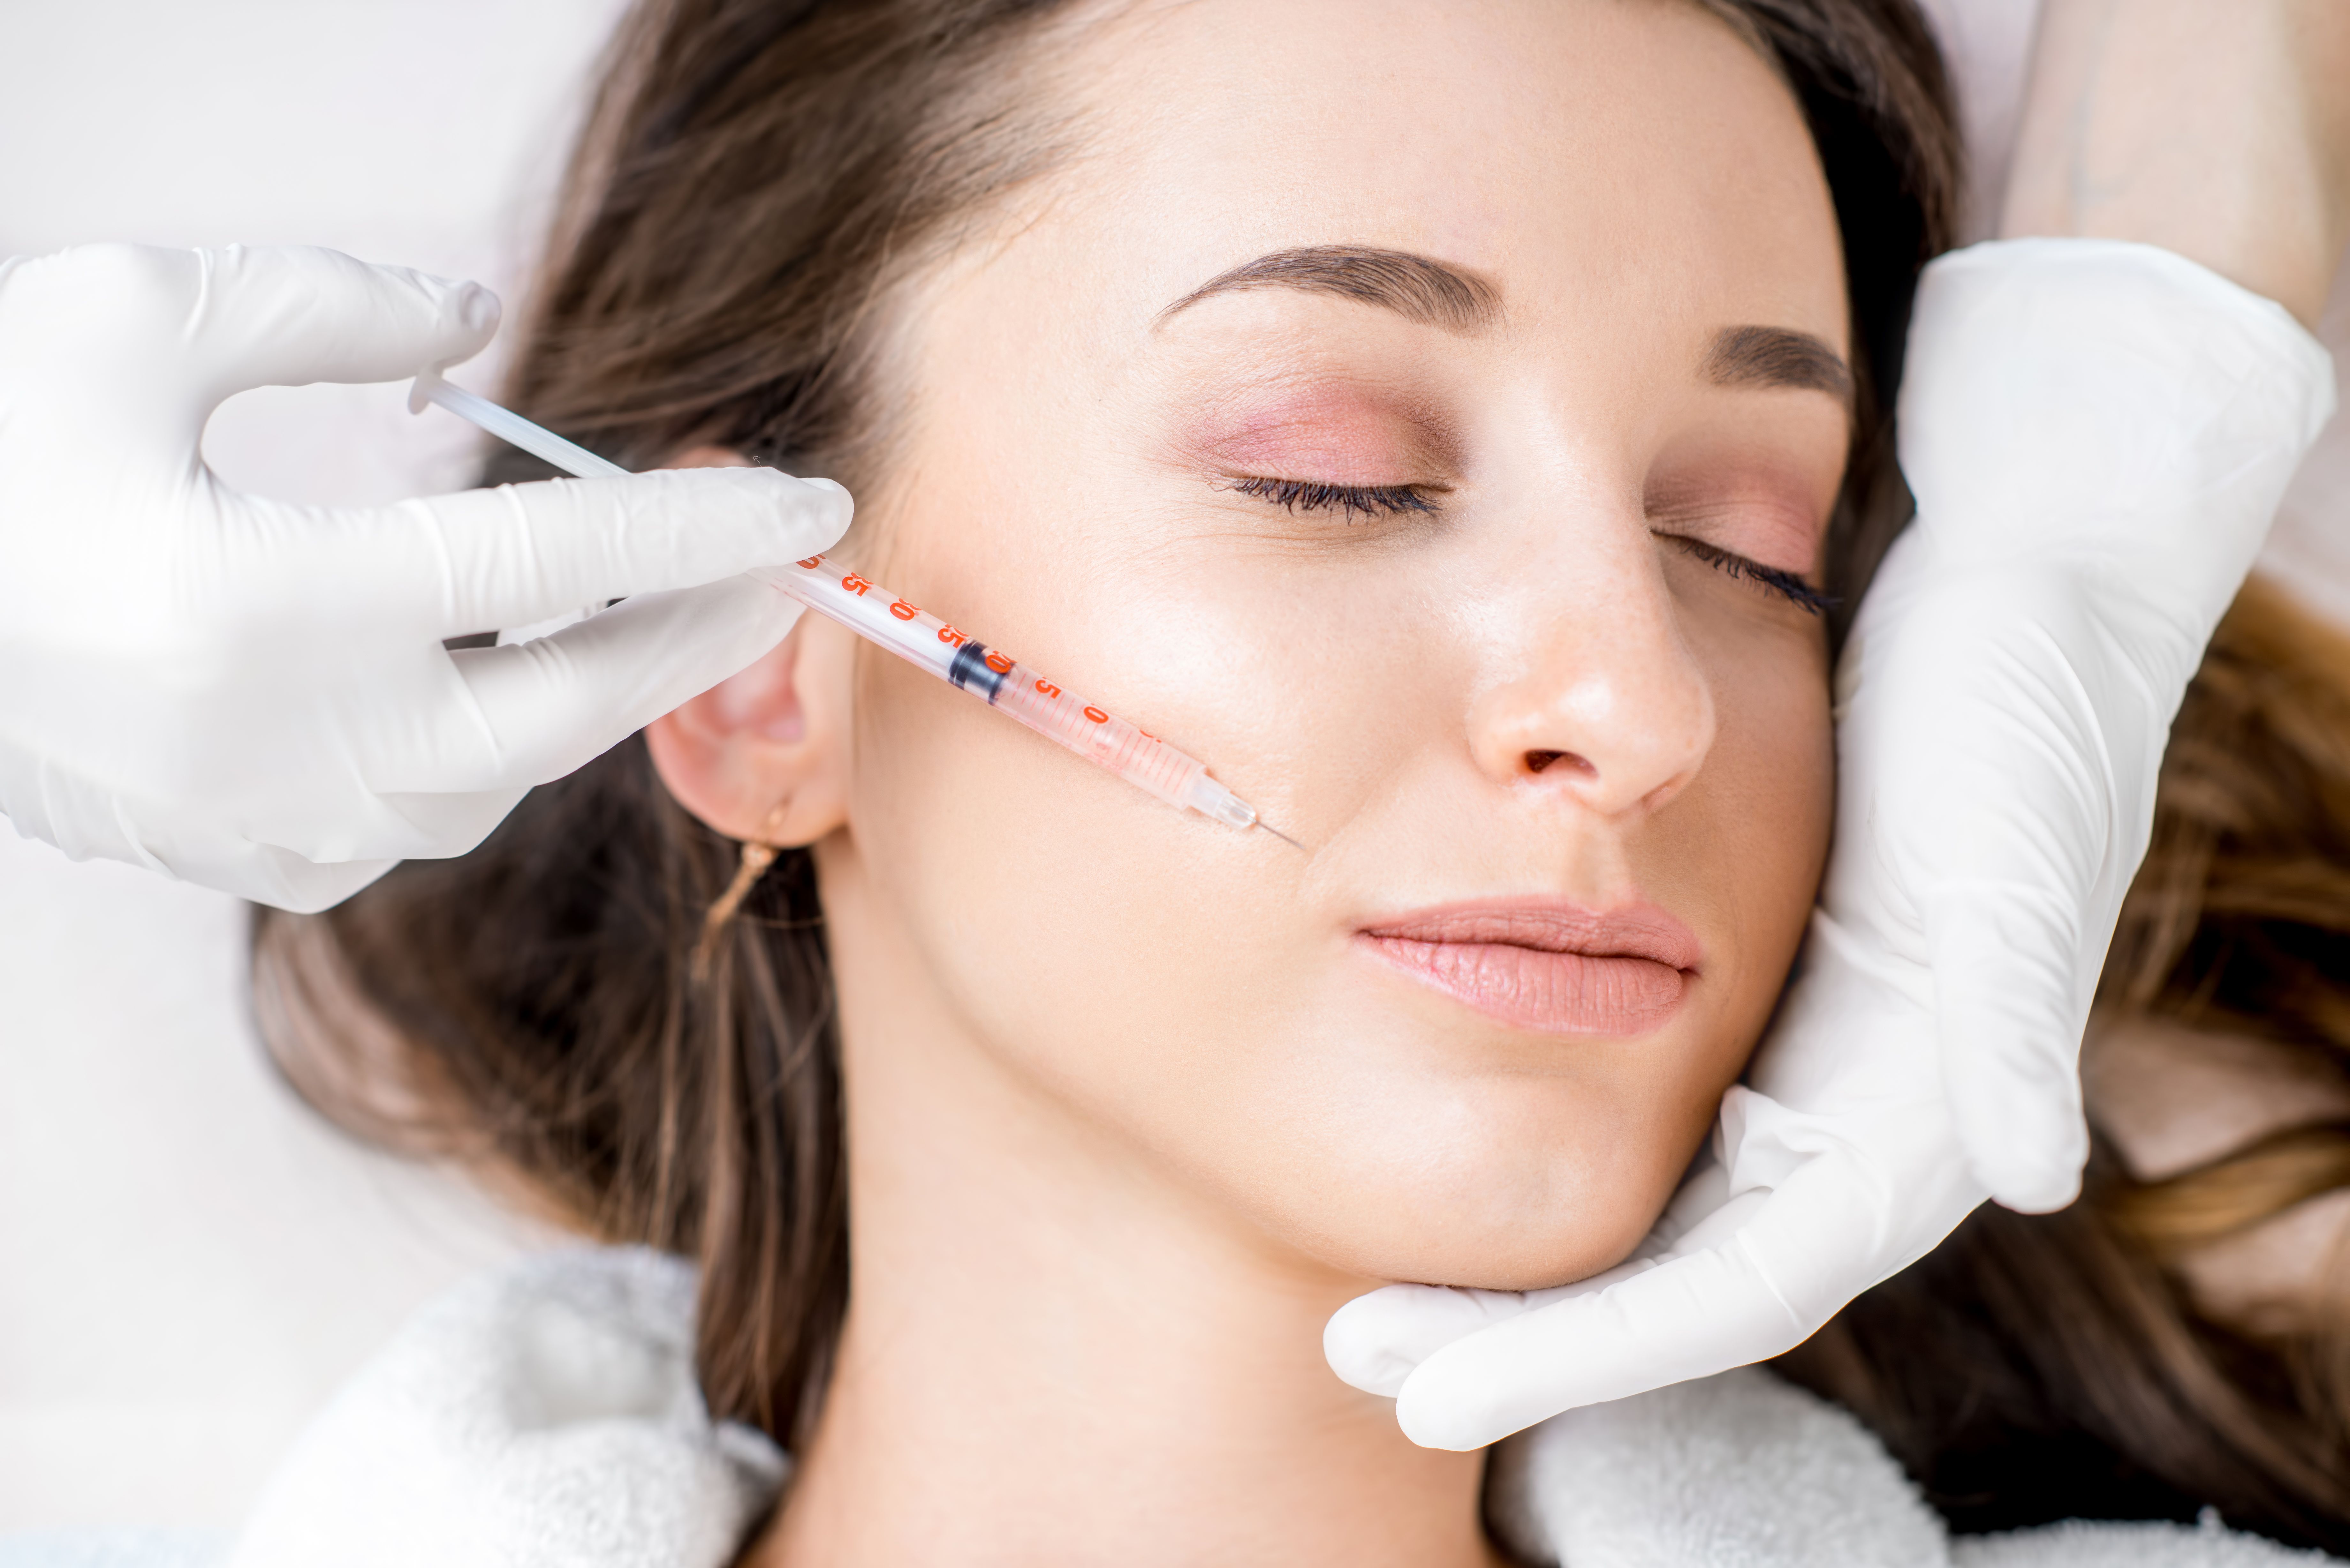 What are botox injections?